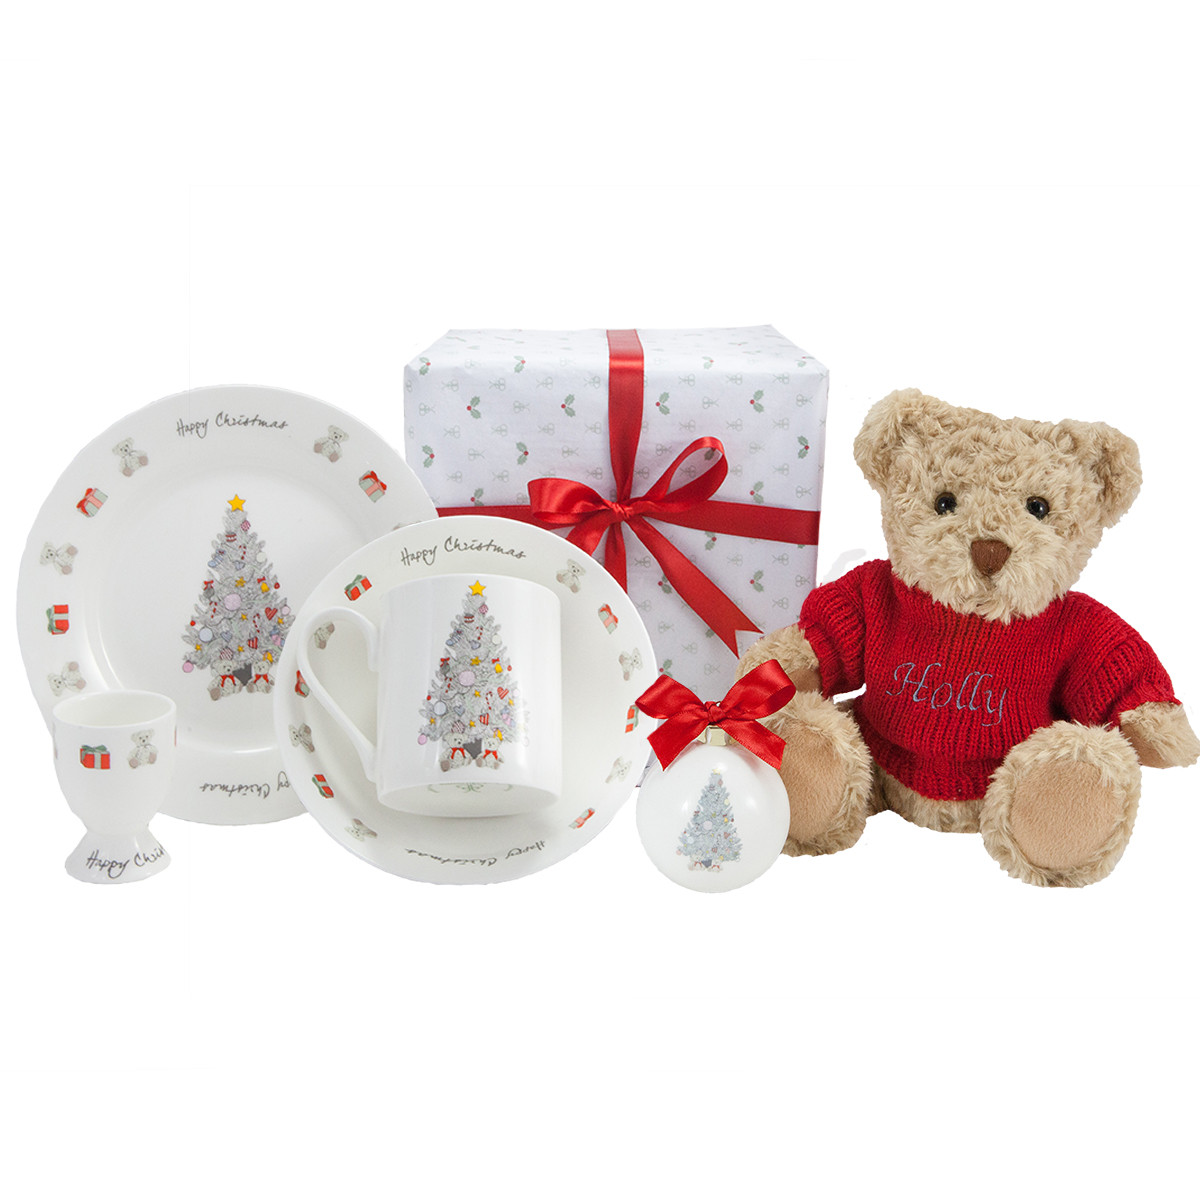 Couple'S First Christmas Gift Ideas
 Baby s First Christmas Gift Ideas The Syders